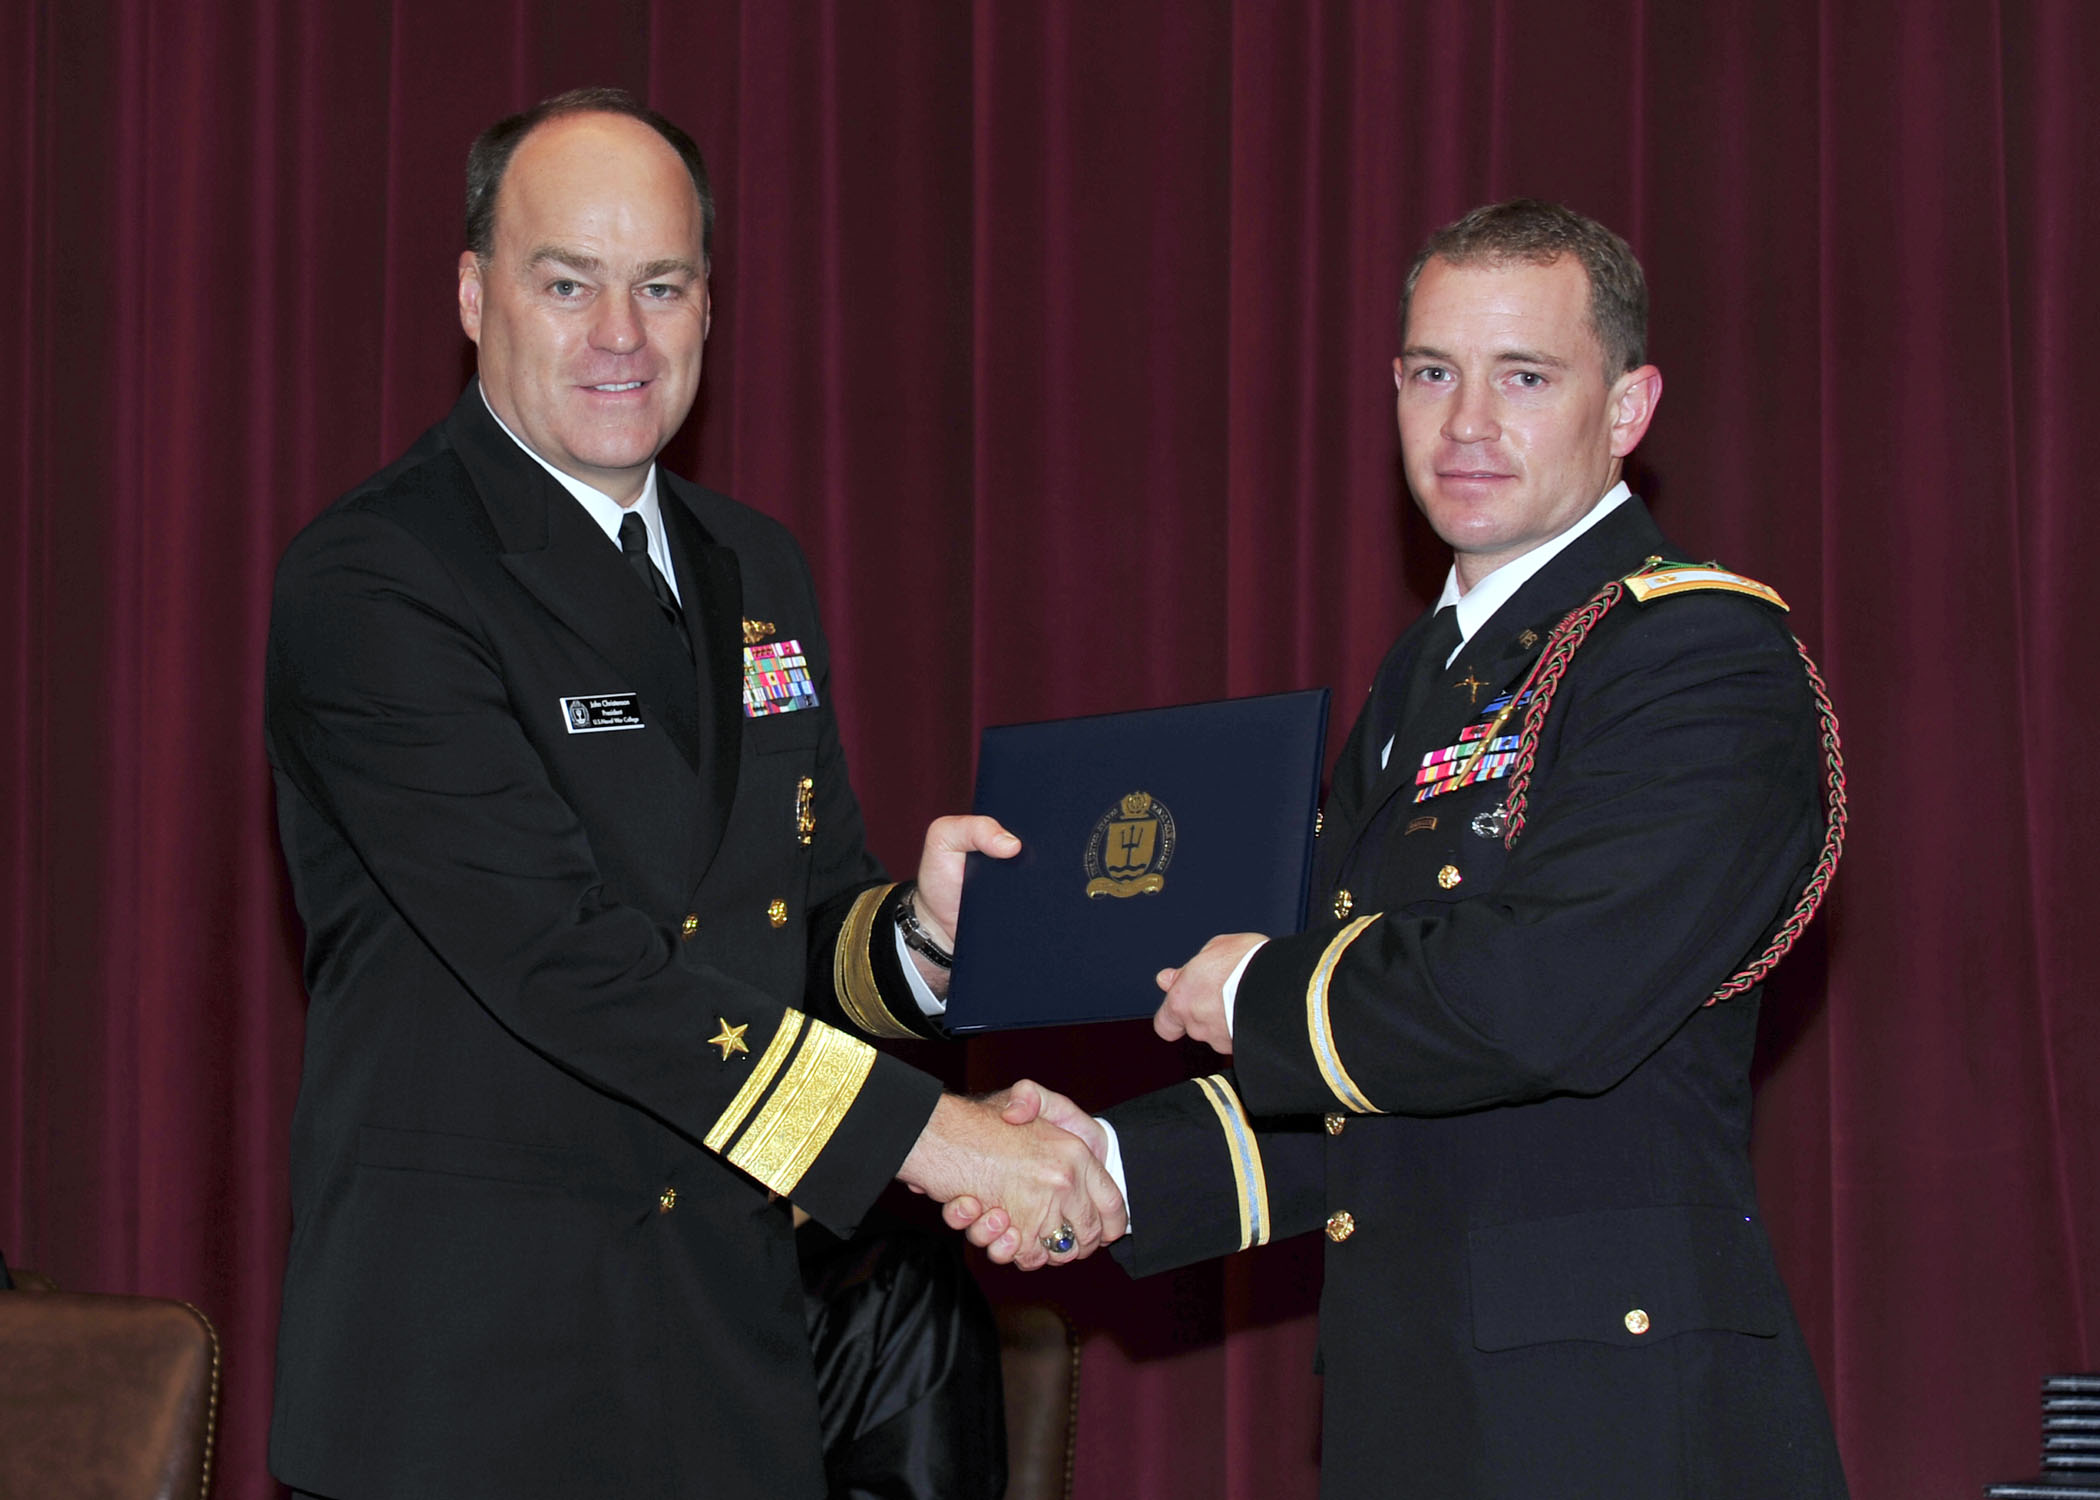 two men in military dress uniforms hold an award